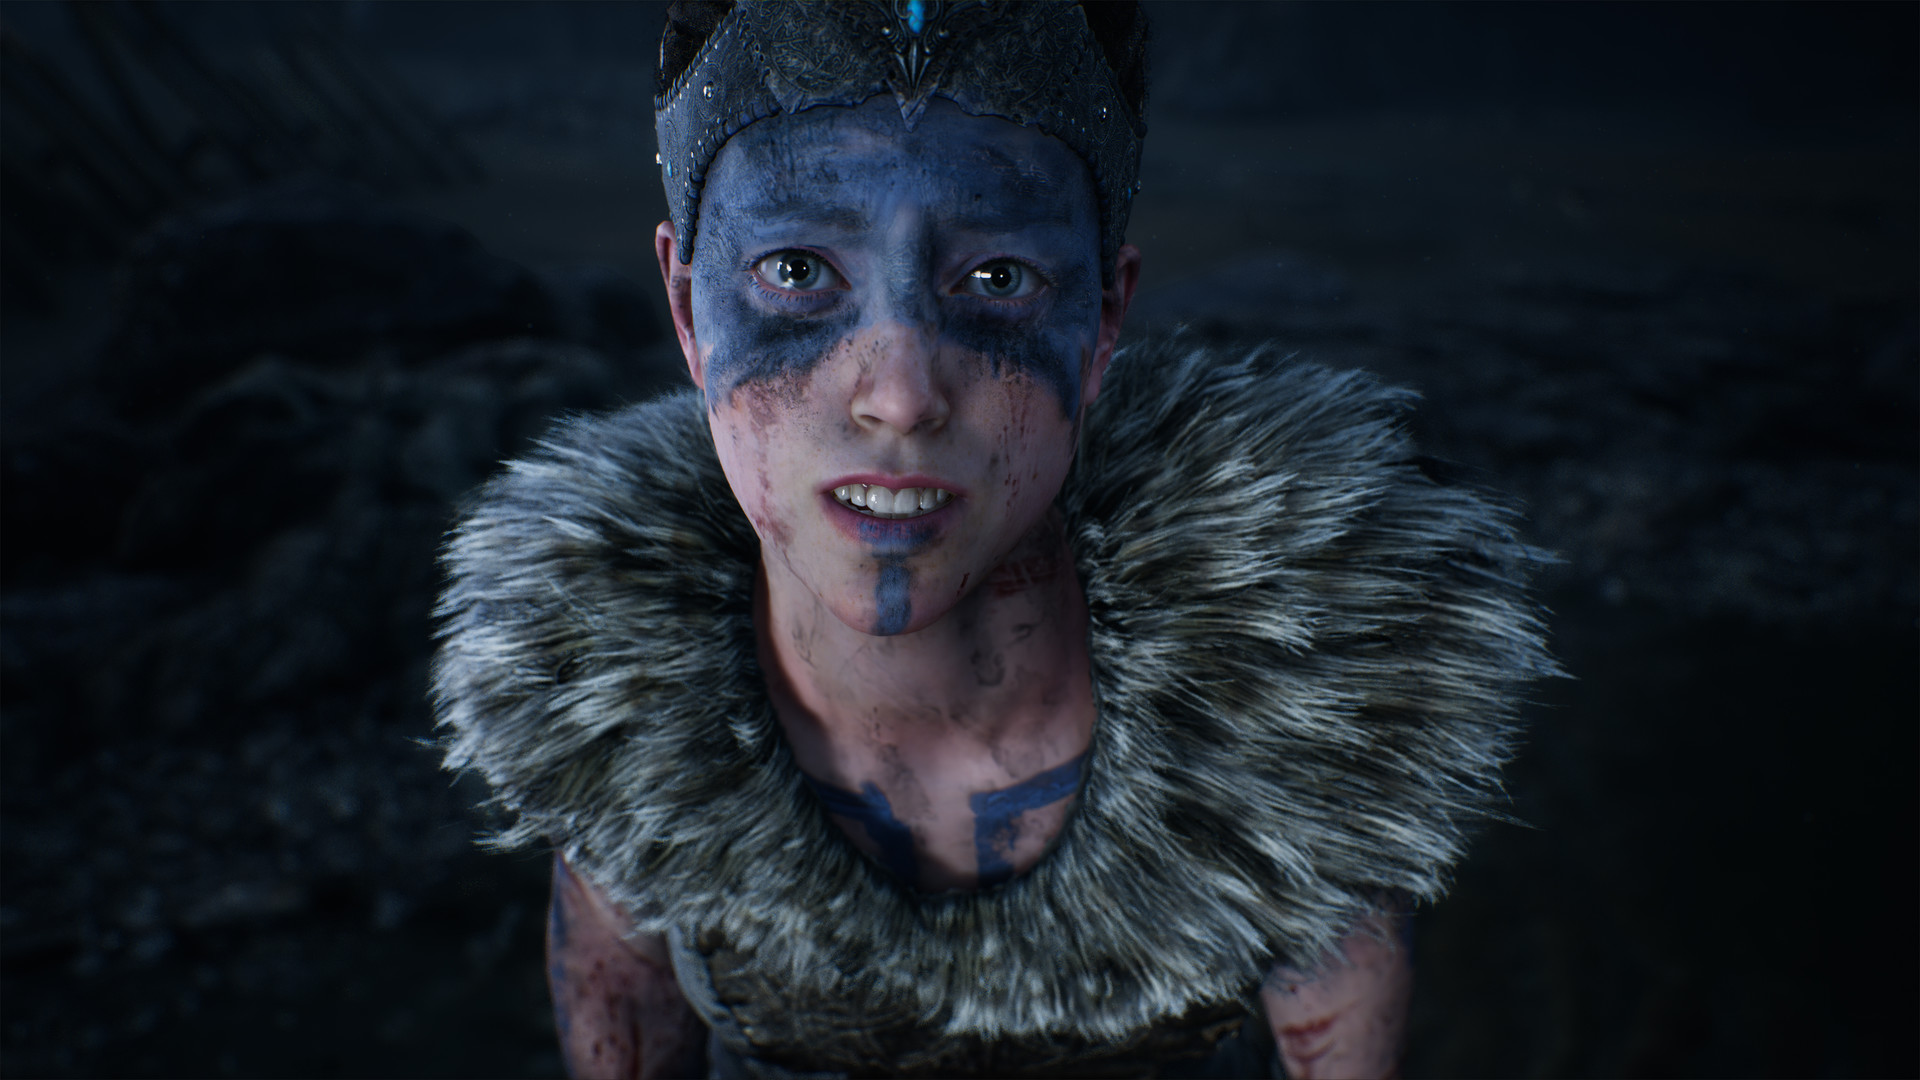 Hellblade: Senua’s Sacrifice (Ps4) Review: Fear Through The Eyes Of Madness 7